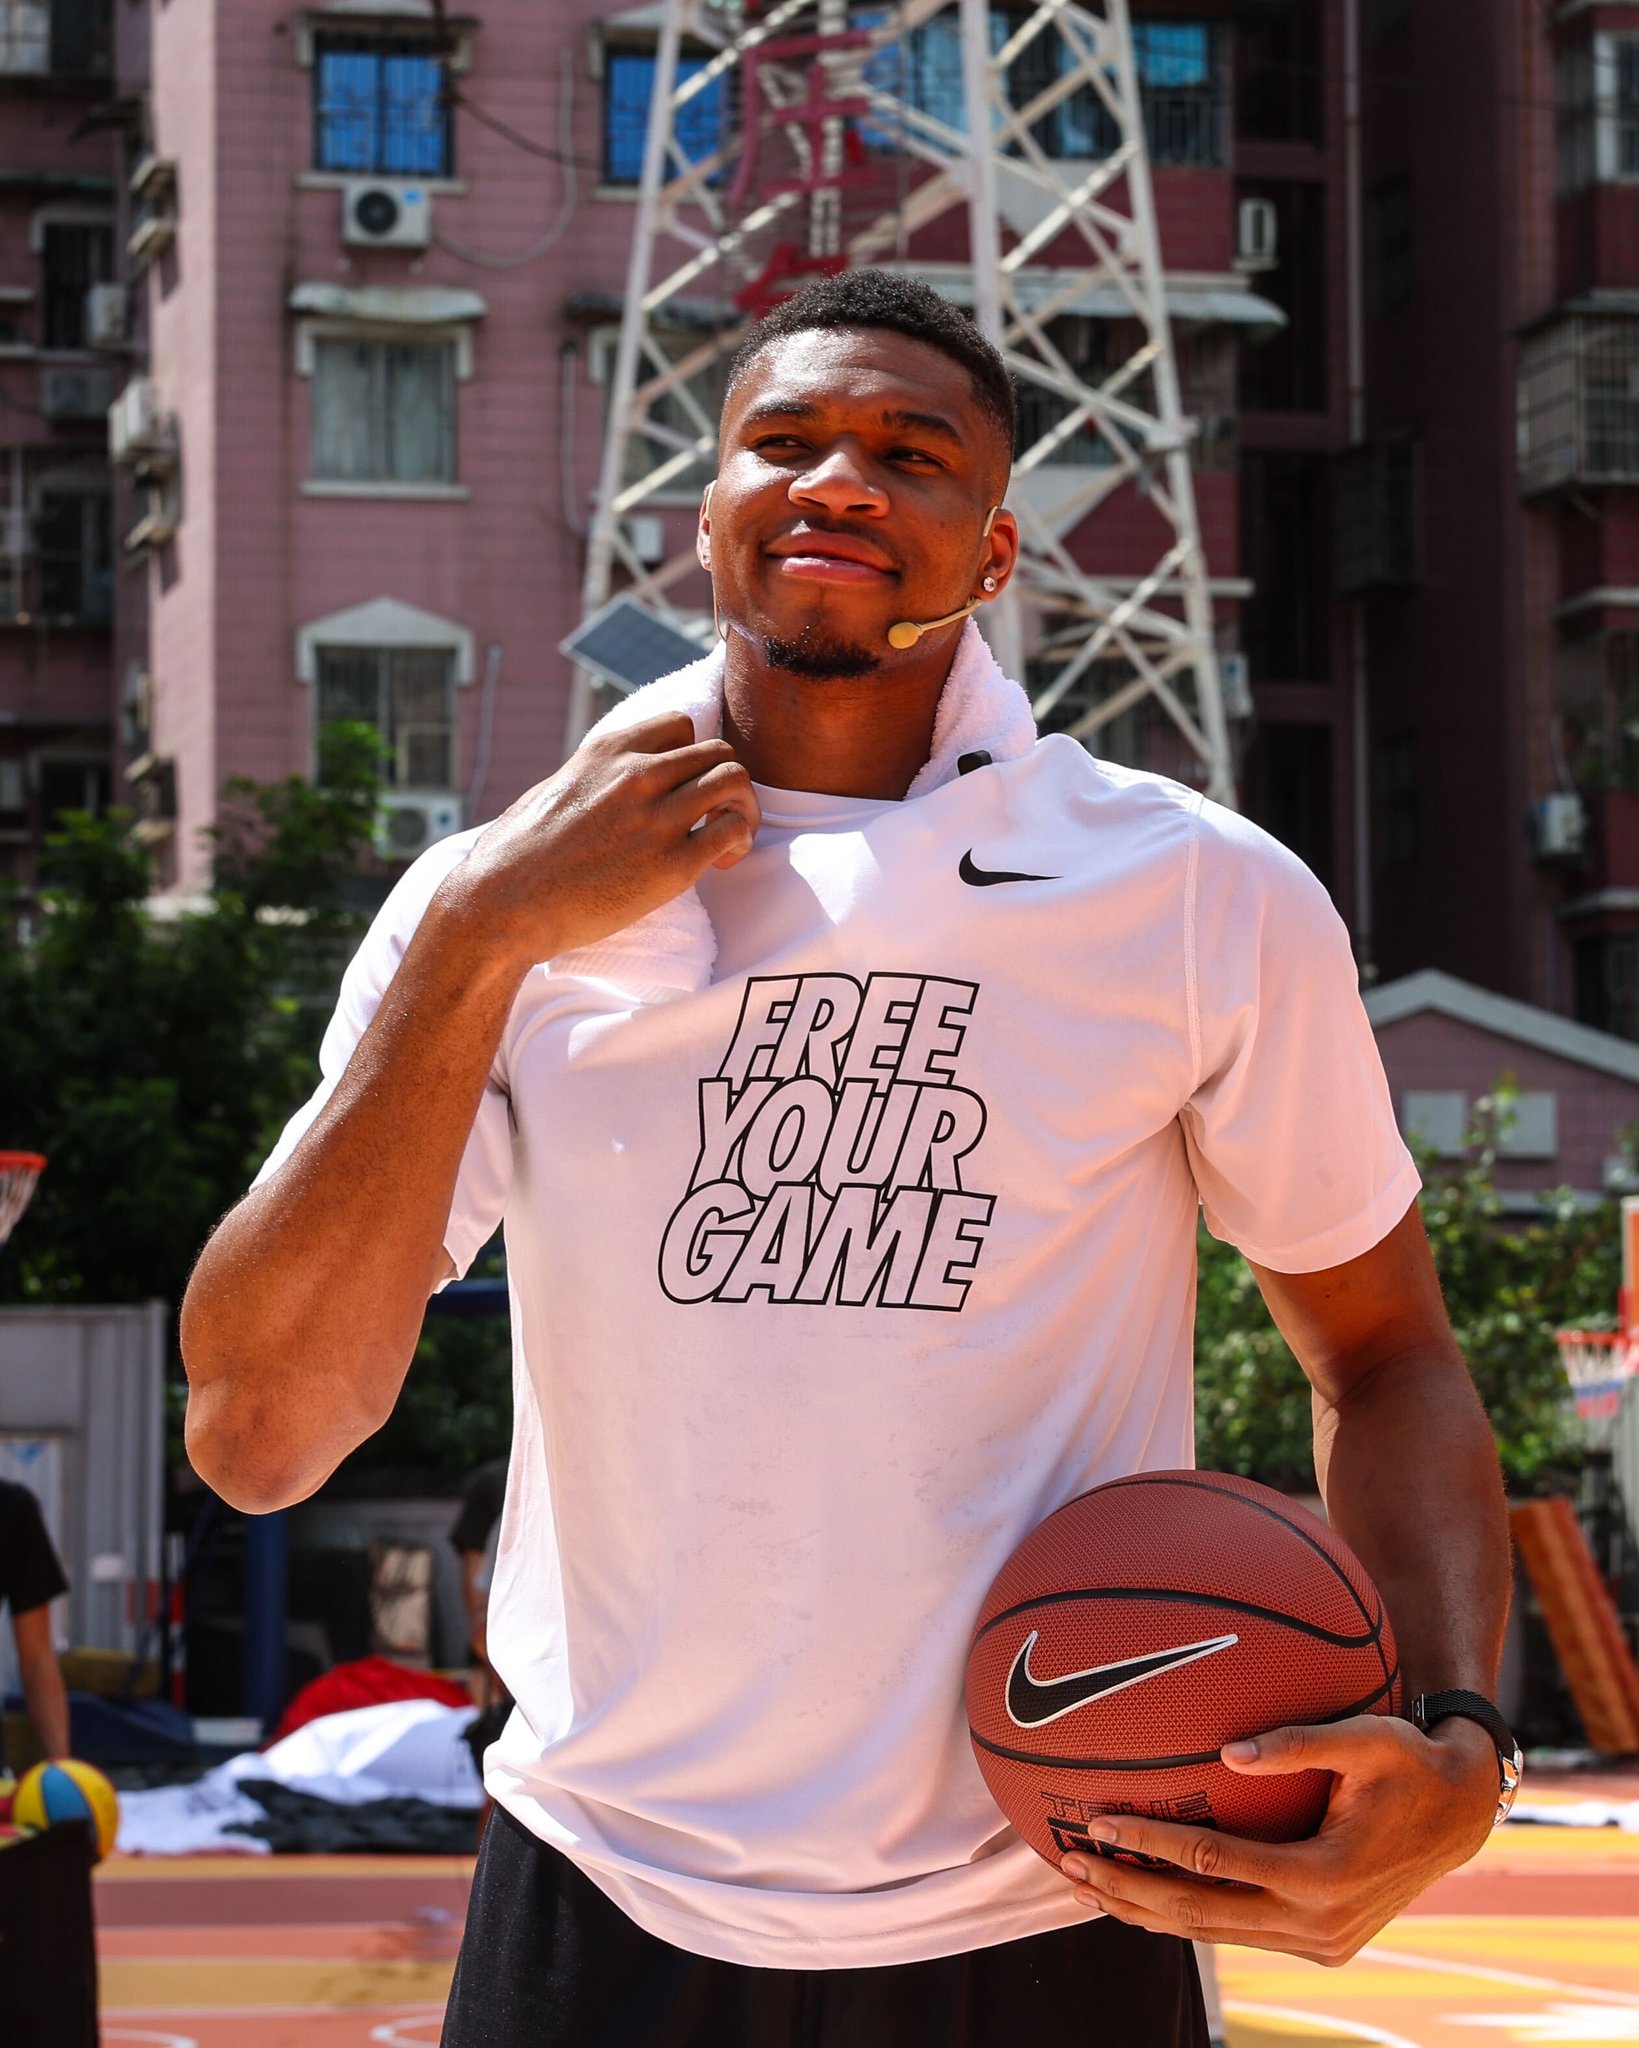 NBA players competing in the 2023 FIBA World Cup: Giannis Antetokounmpo 